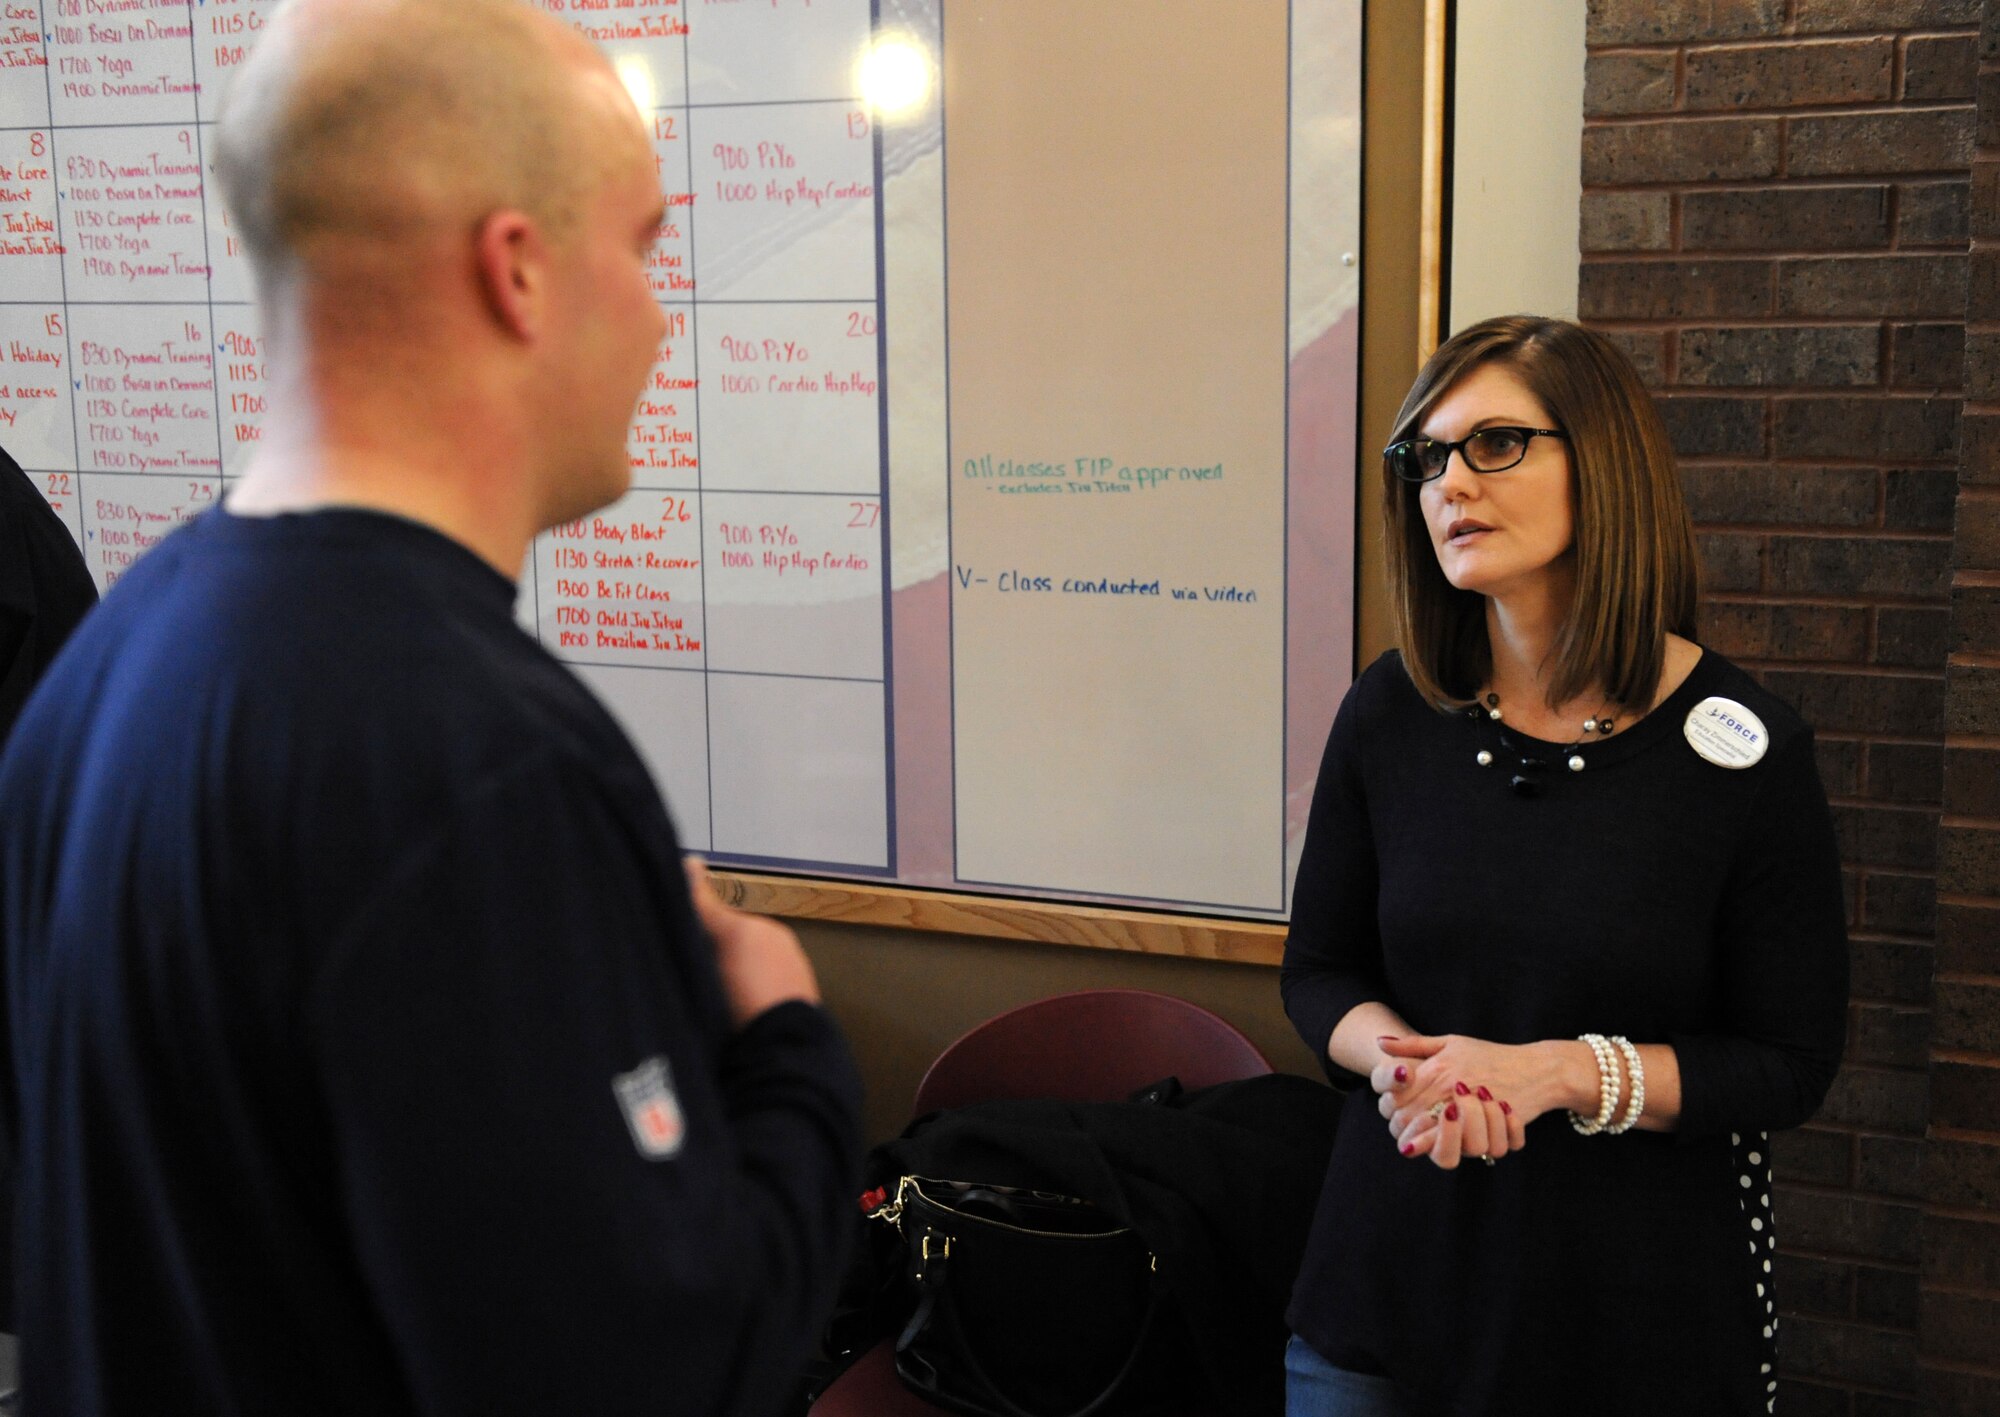 Charay Zimmerschied, a 509th Force Support Squadron education specialist, briefs a member of Team Whiteman during an information expo at Whiteman Air Force Base, Mo., Jan. 29, 2016. The information expo provided individuals with guidance from support agencies, such as the education center, to help members achieve their goals for the year. (U.S. Air Force photo by Tech. Sgt. Miguel Lara III)